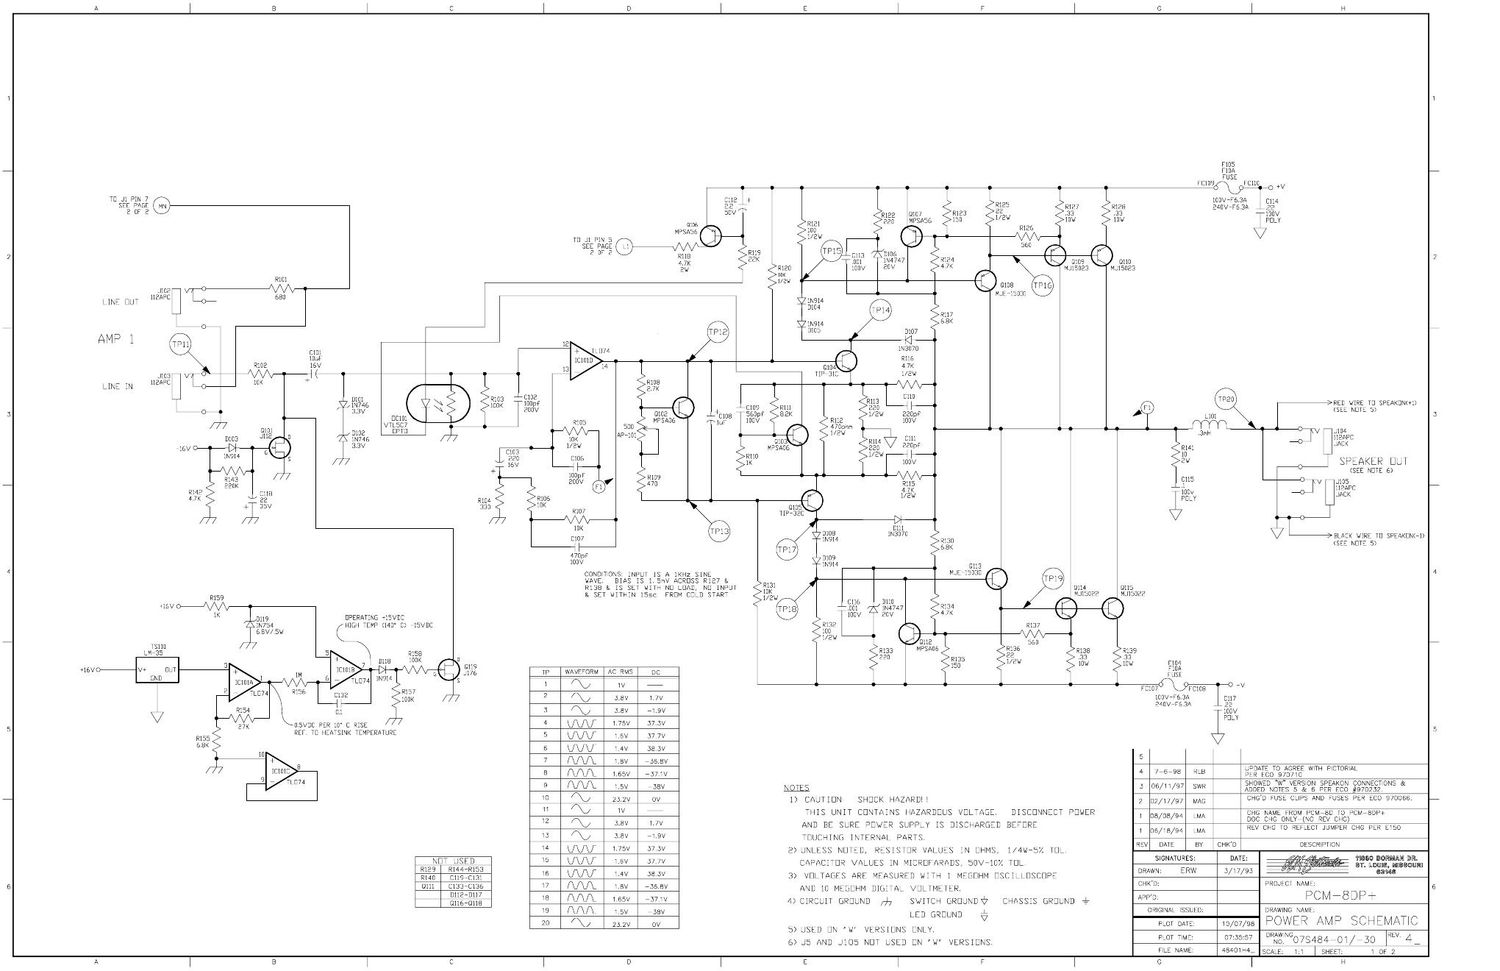 Crate PCM 8DP Power Amp 07S484 Schematic